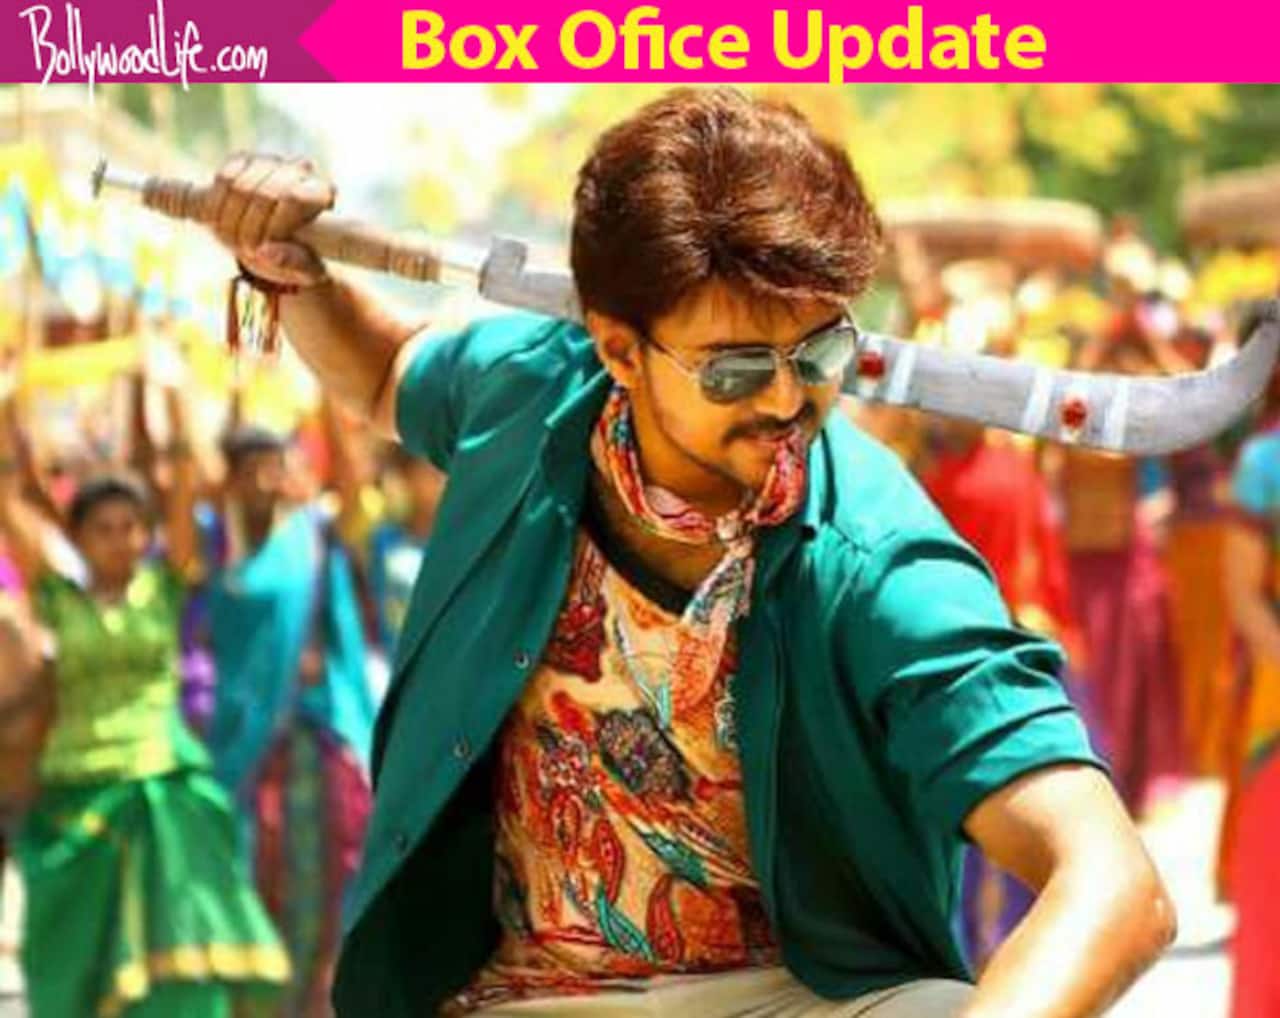 Bairavaa box office collection day 5: Vijay's film earns a whopping Rs 74.7 crore at Tamil Nadu box office